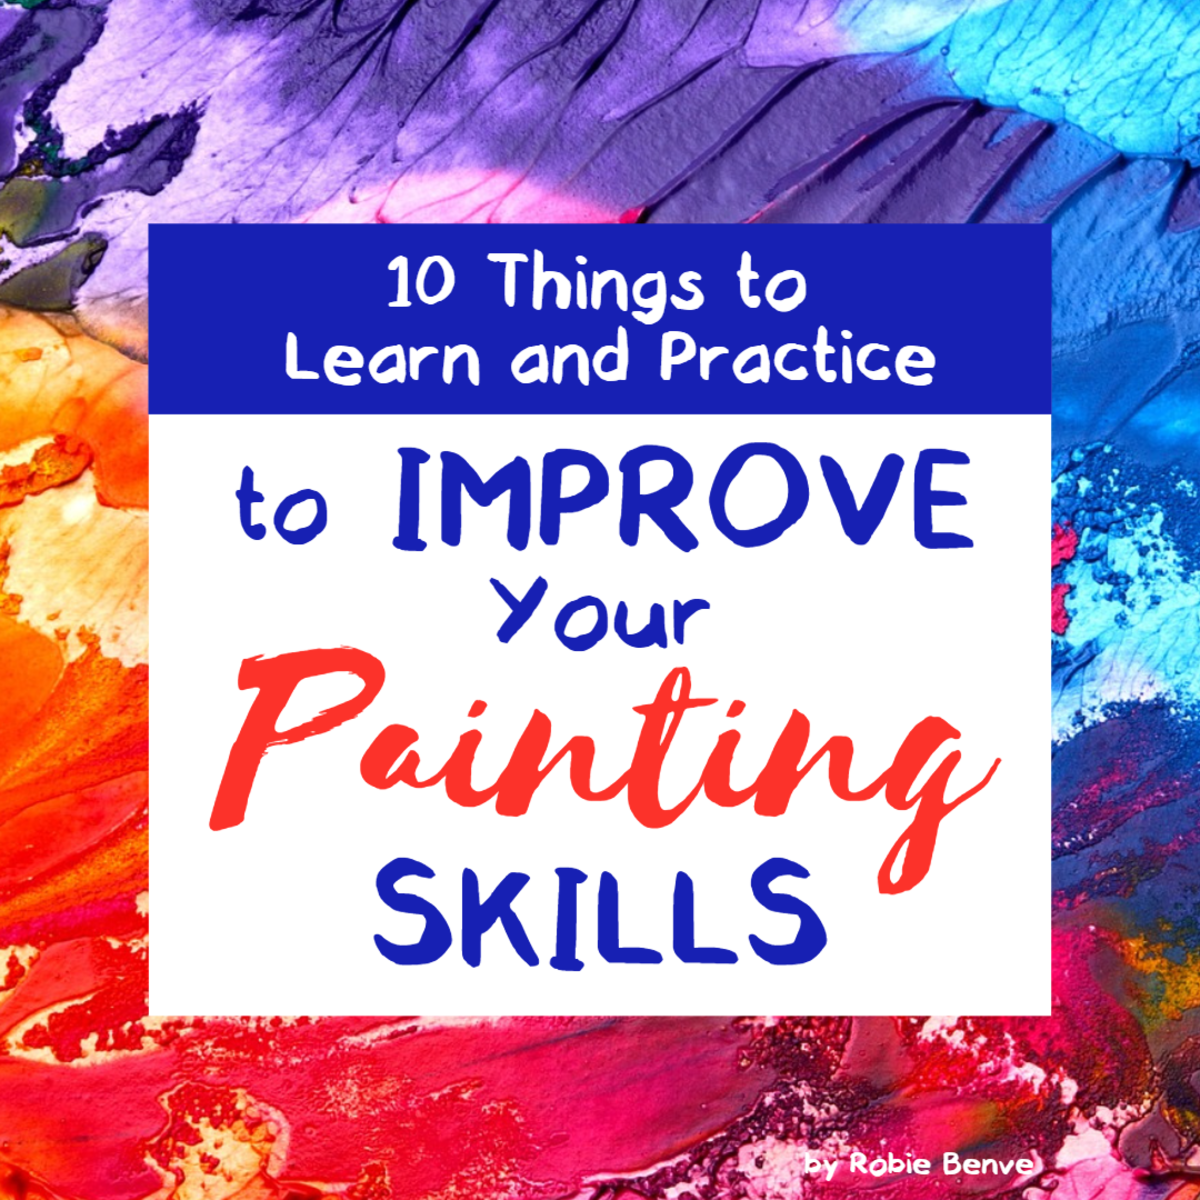 From the beginning of a painting to the end, here are the 10 things you should focus on.